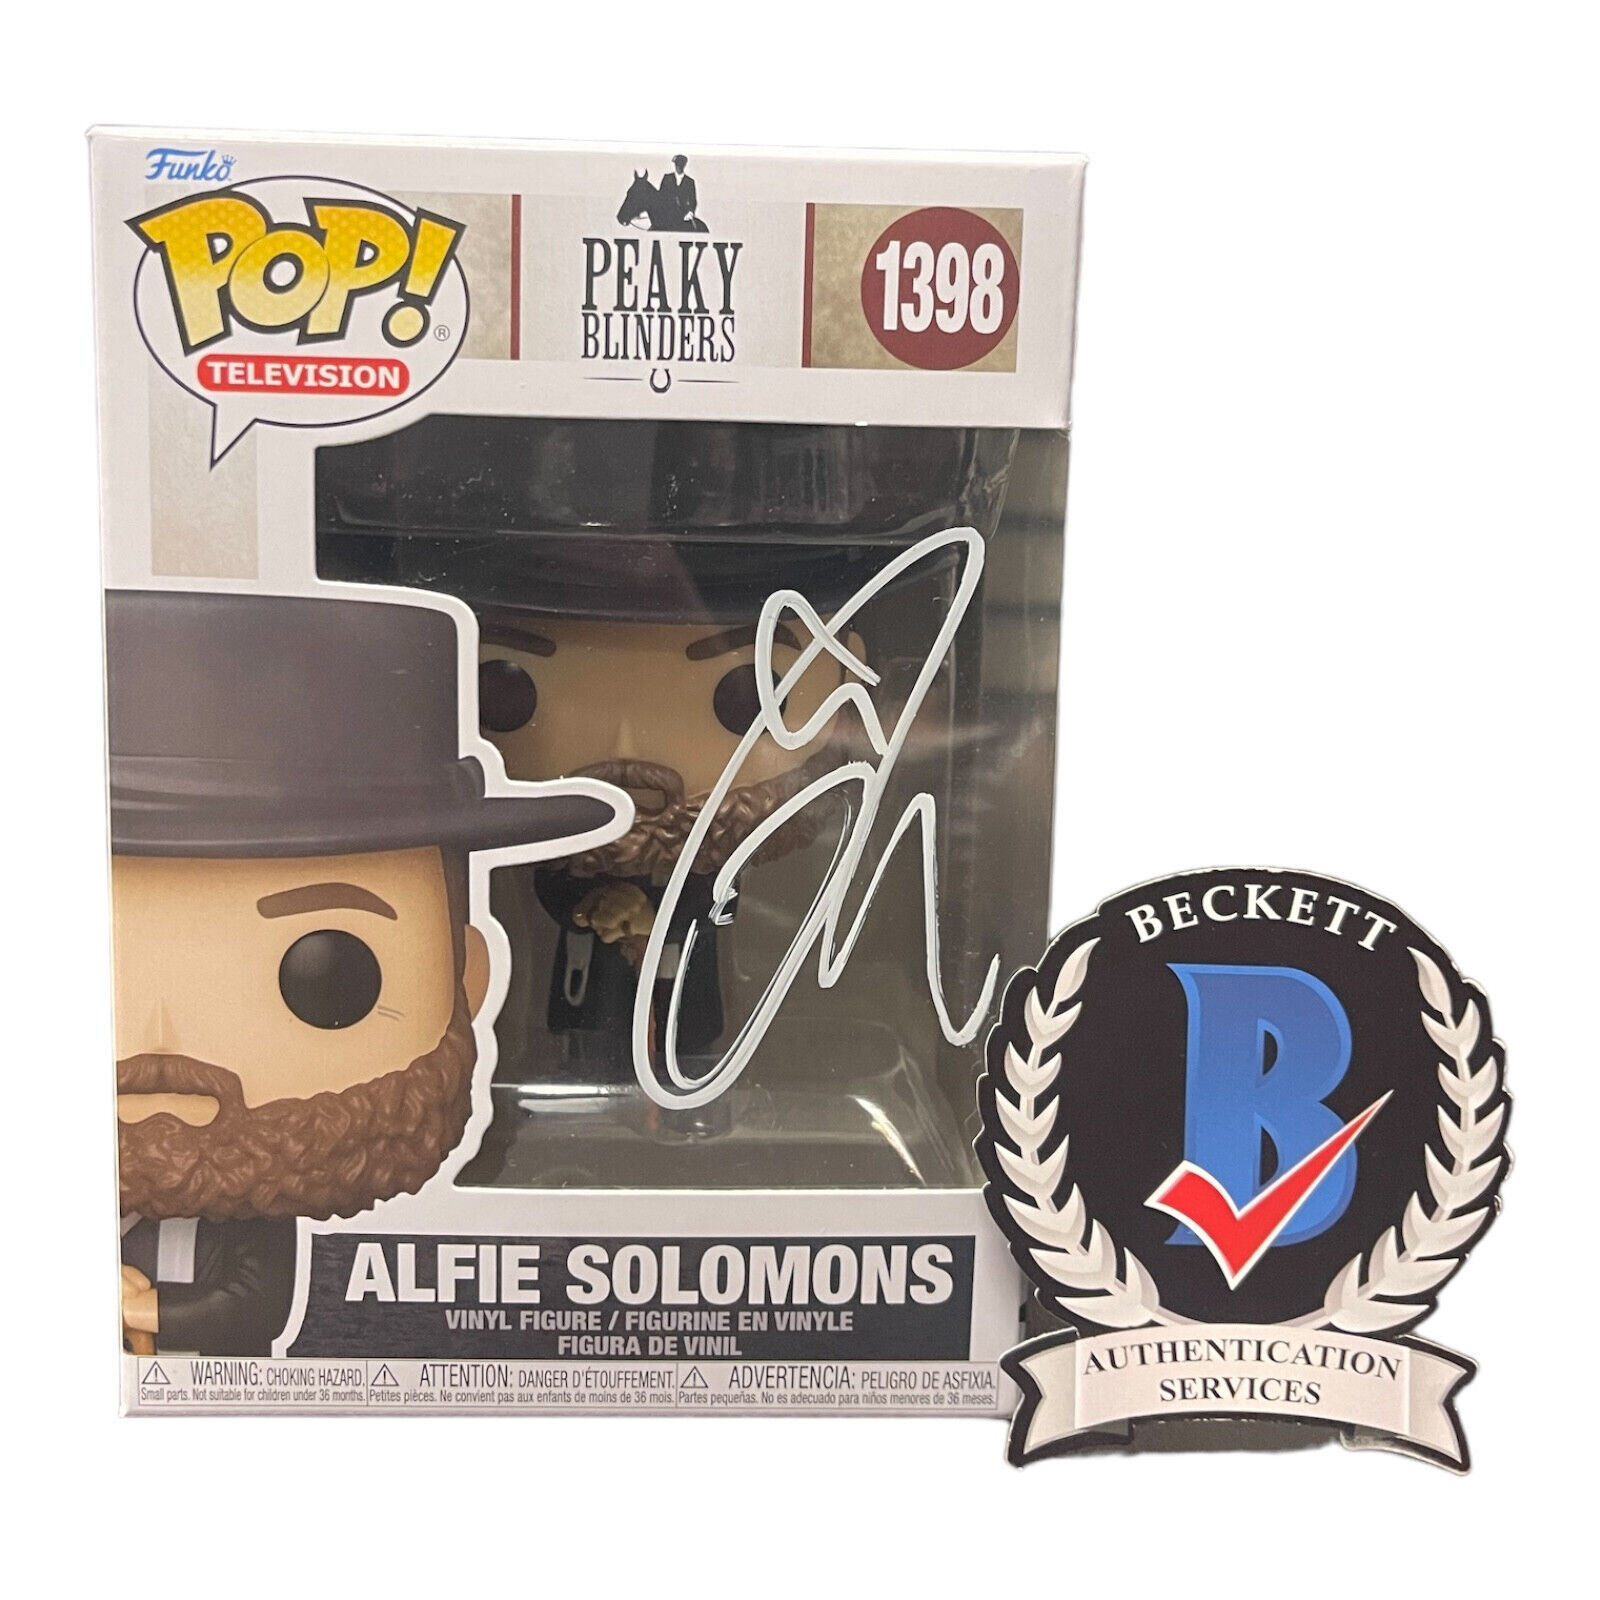 Tom Hardy Signed Autograph Peaky Blinders Funko Pop 1398 Beckett  BAS